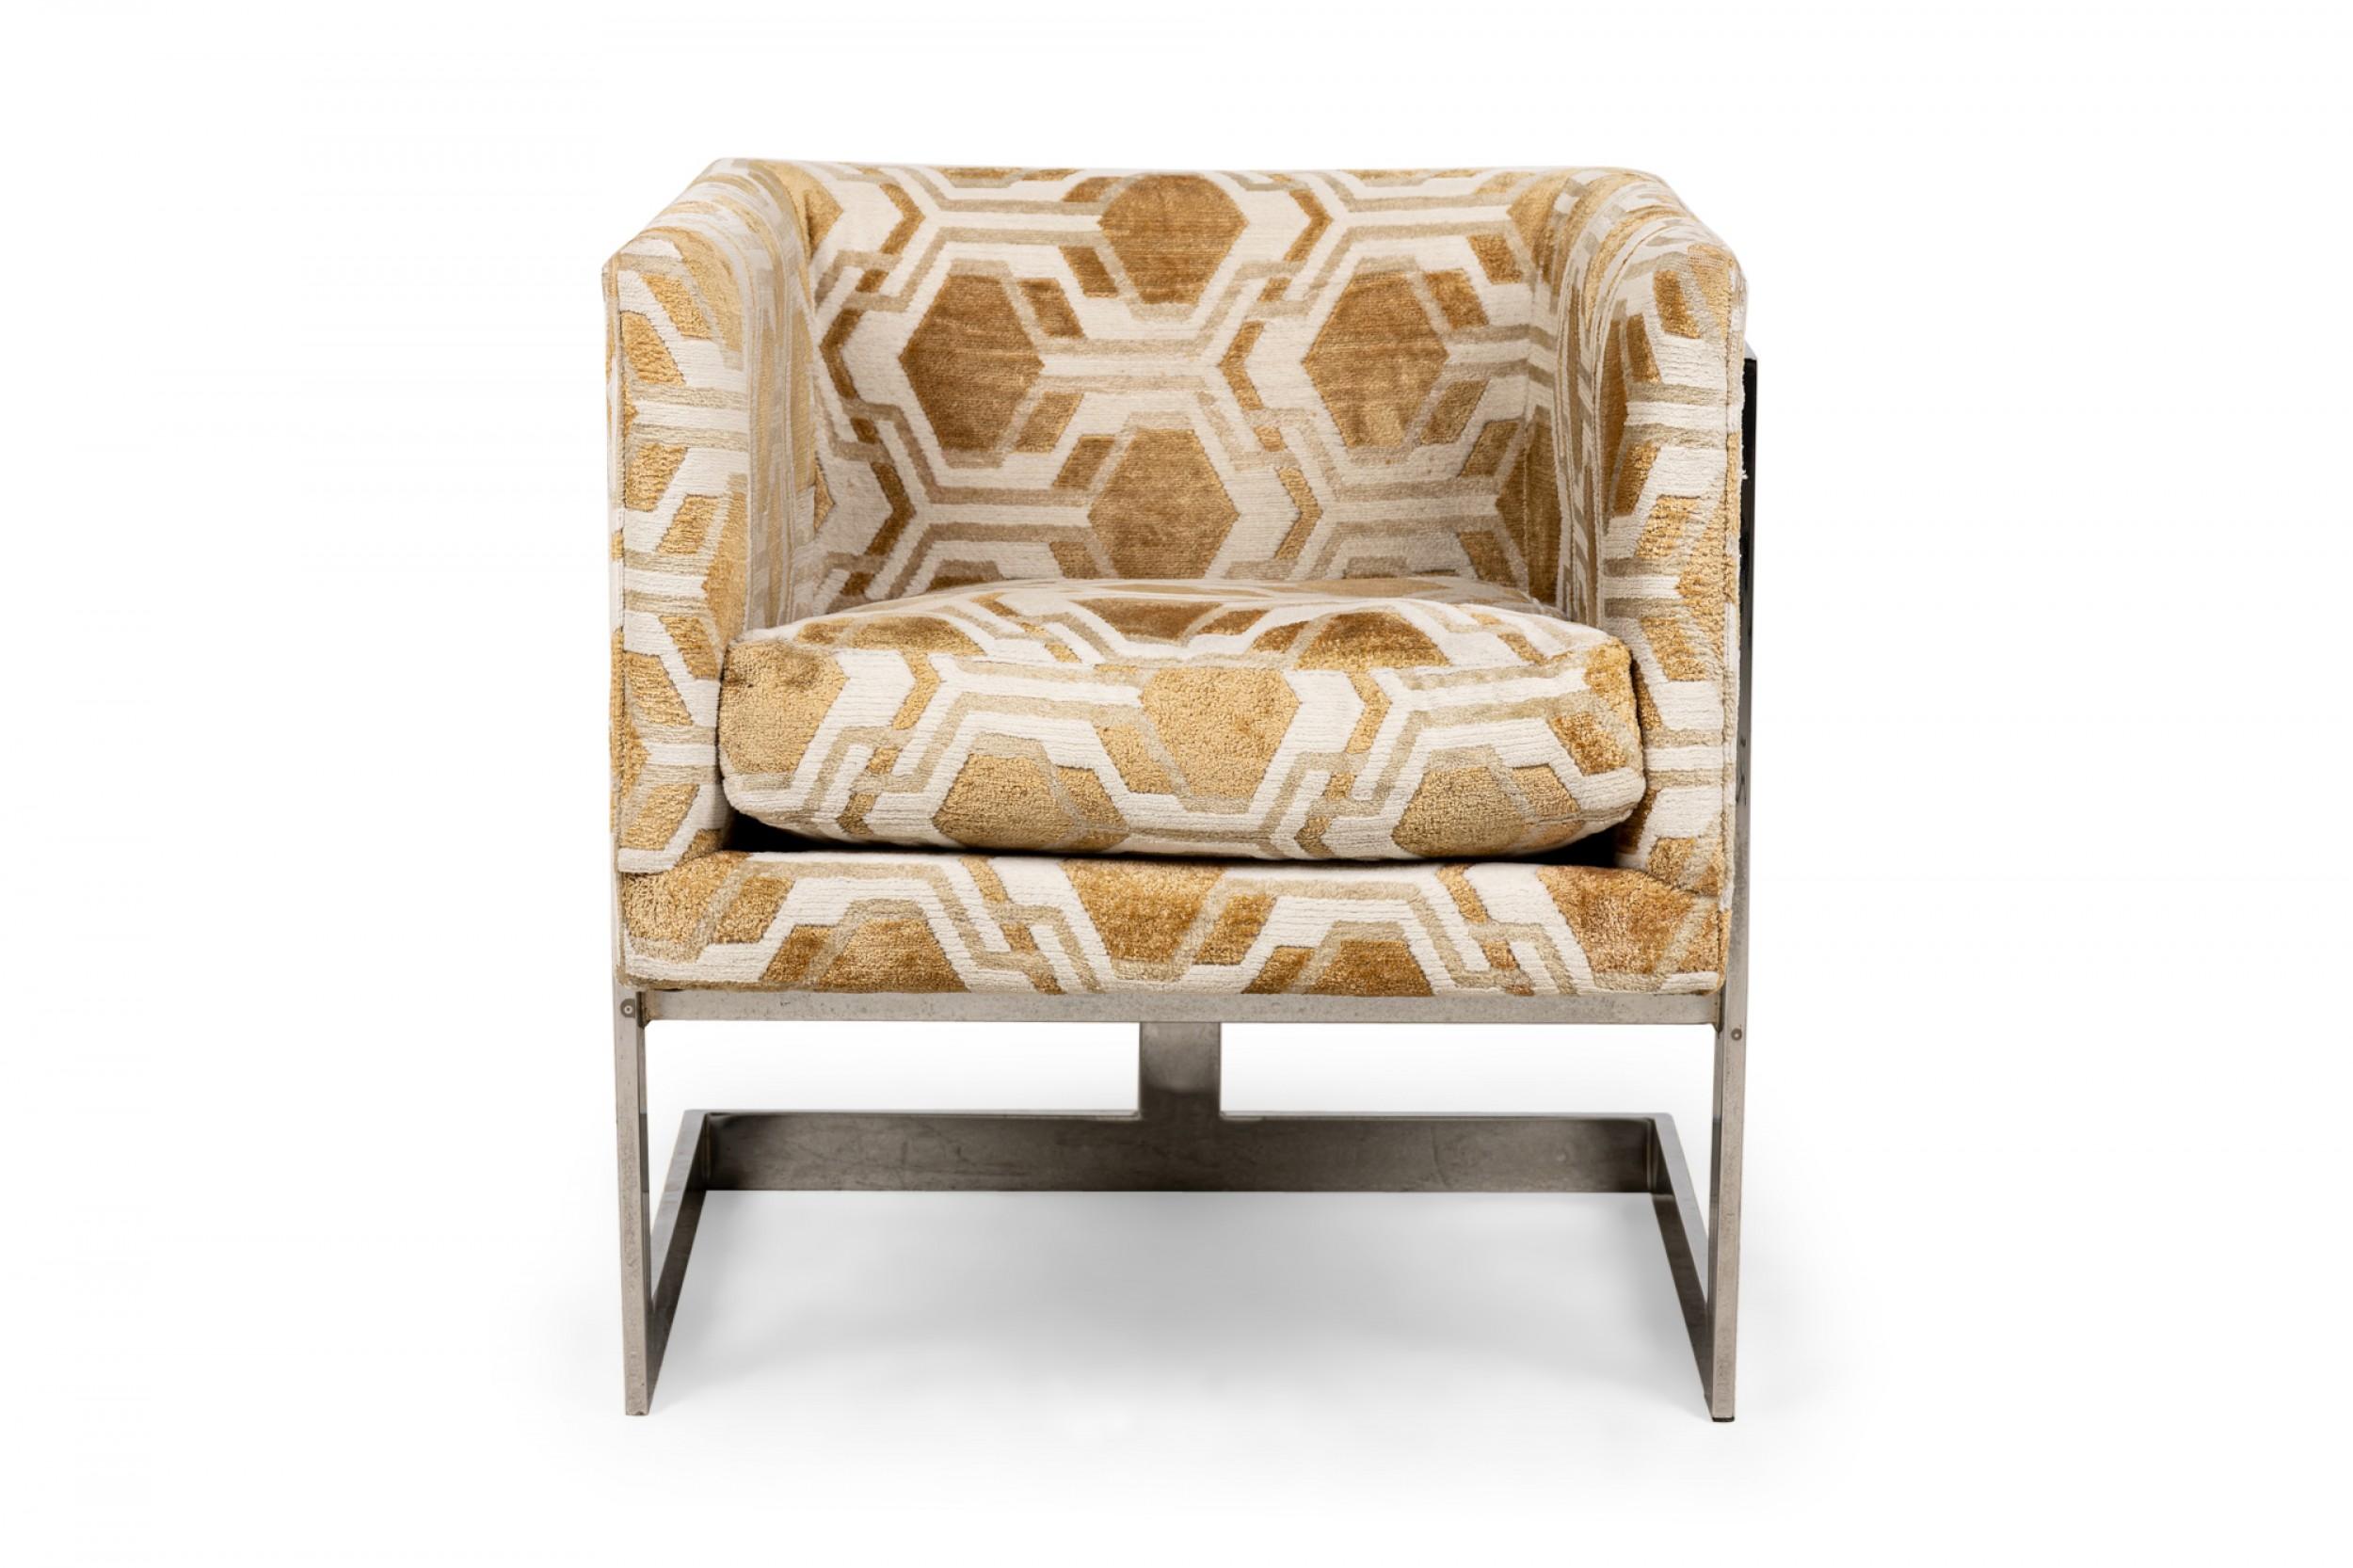 Pair of American Mid-Century cube form lounge / armchairs with gold and white geometric patterned fabric upholstery and square cantilevered chrome frames. (Milo Baughman)(Priced as Pair).
  